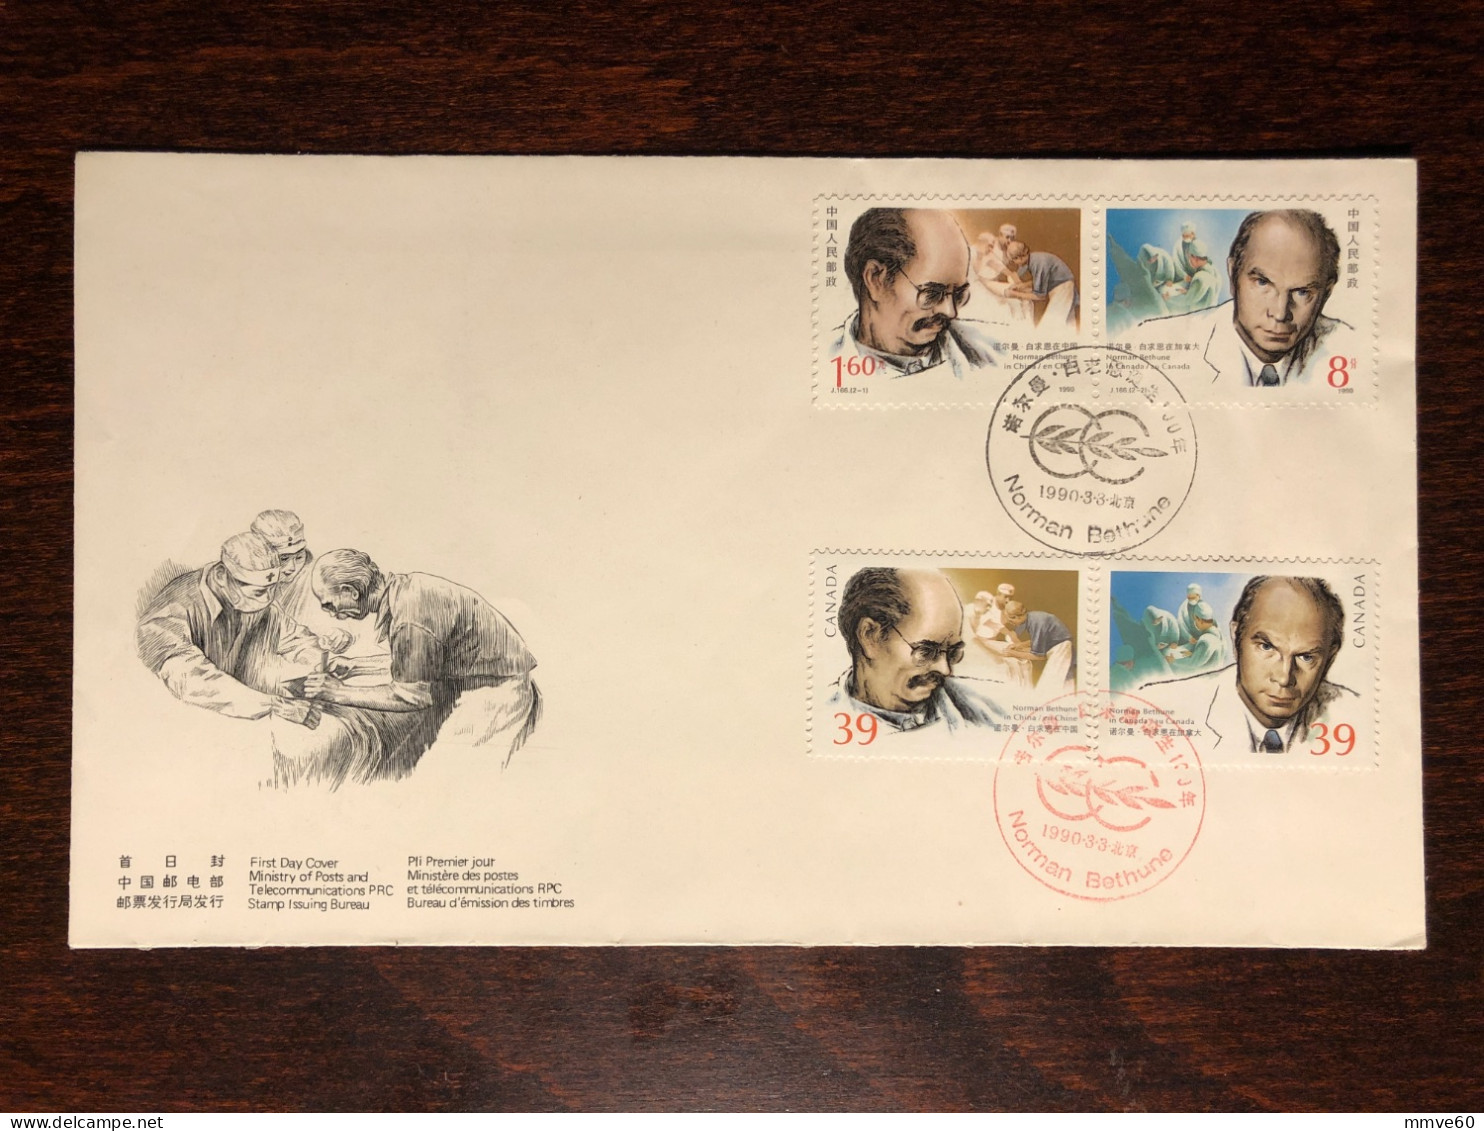 CHINA PRC FDC COVER JOINT ISSUE CHINA AND CANADA 1990 YEAR DOCTOR BETHUNE  HEALTH MEDICINE STAMPS - 1980-1989